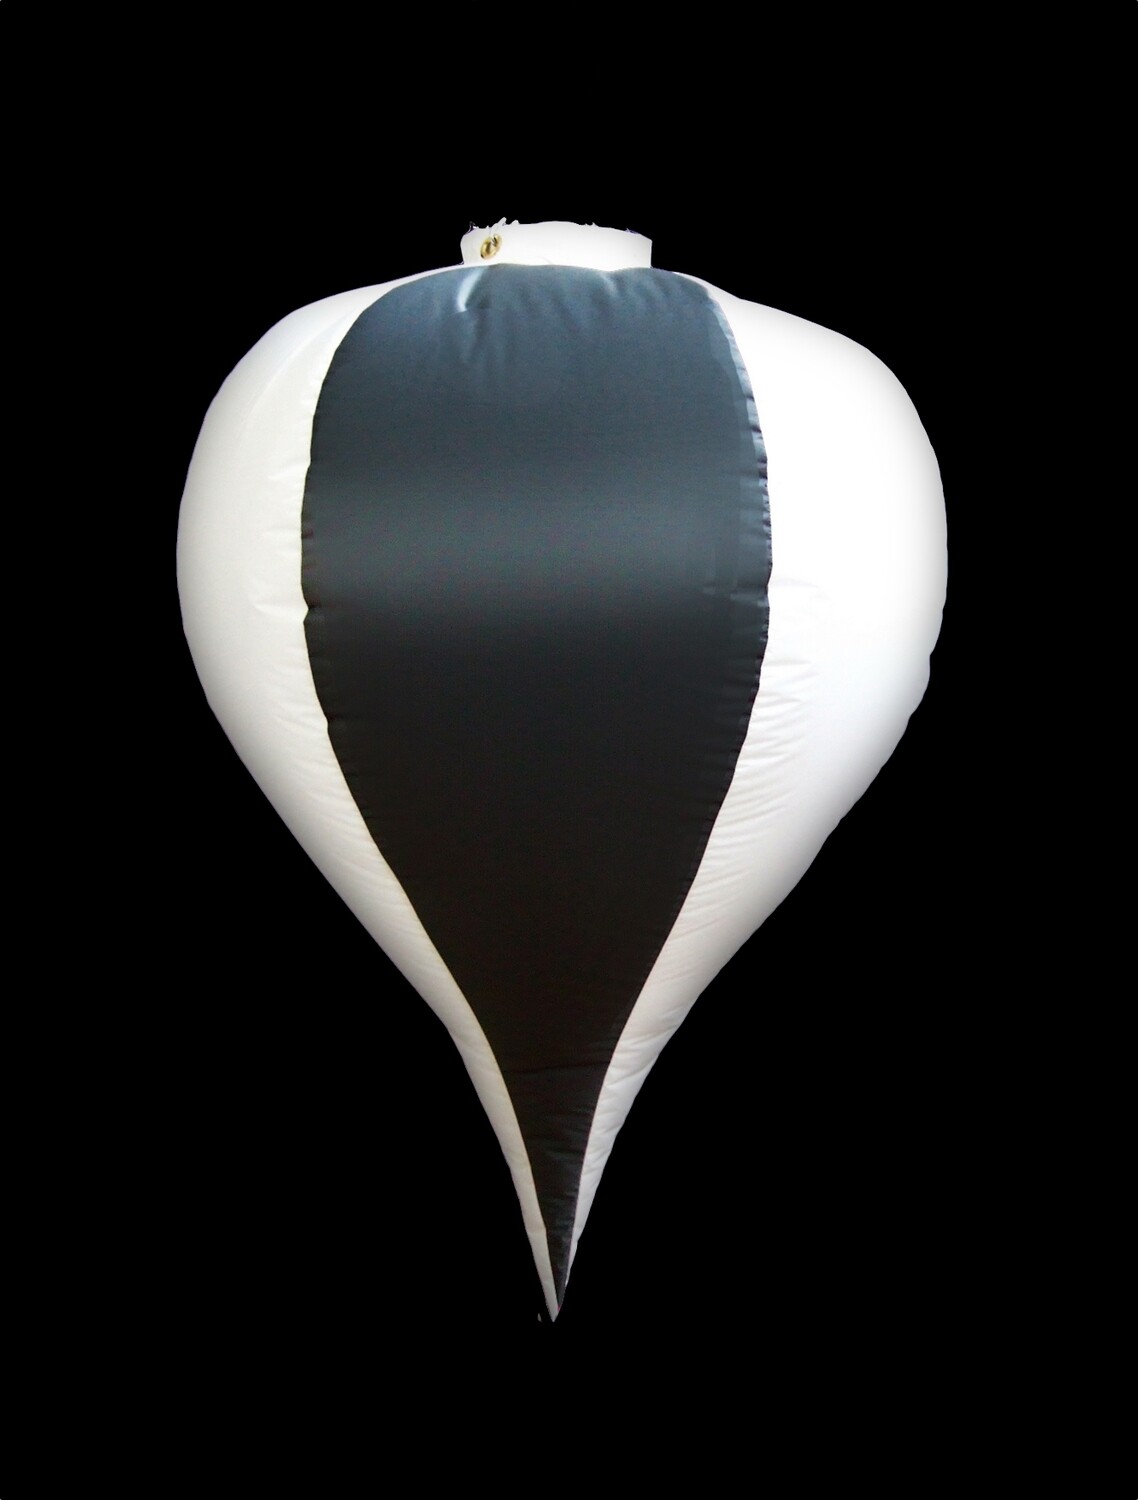 Hanging Inflatable Bauble #1- 5.1ft/155cm x 7ft/214cm